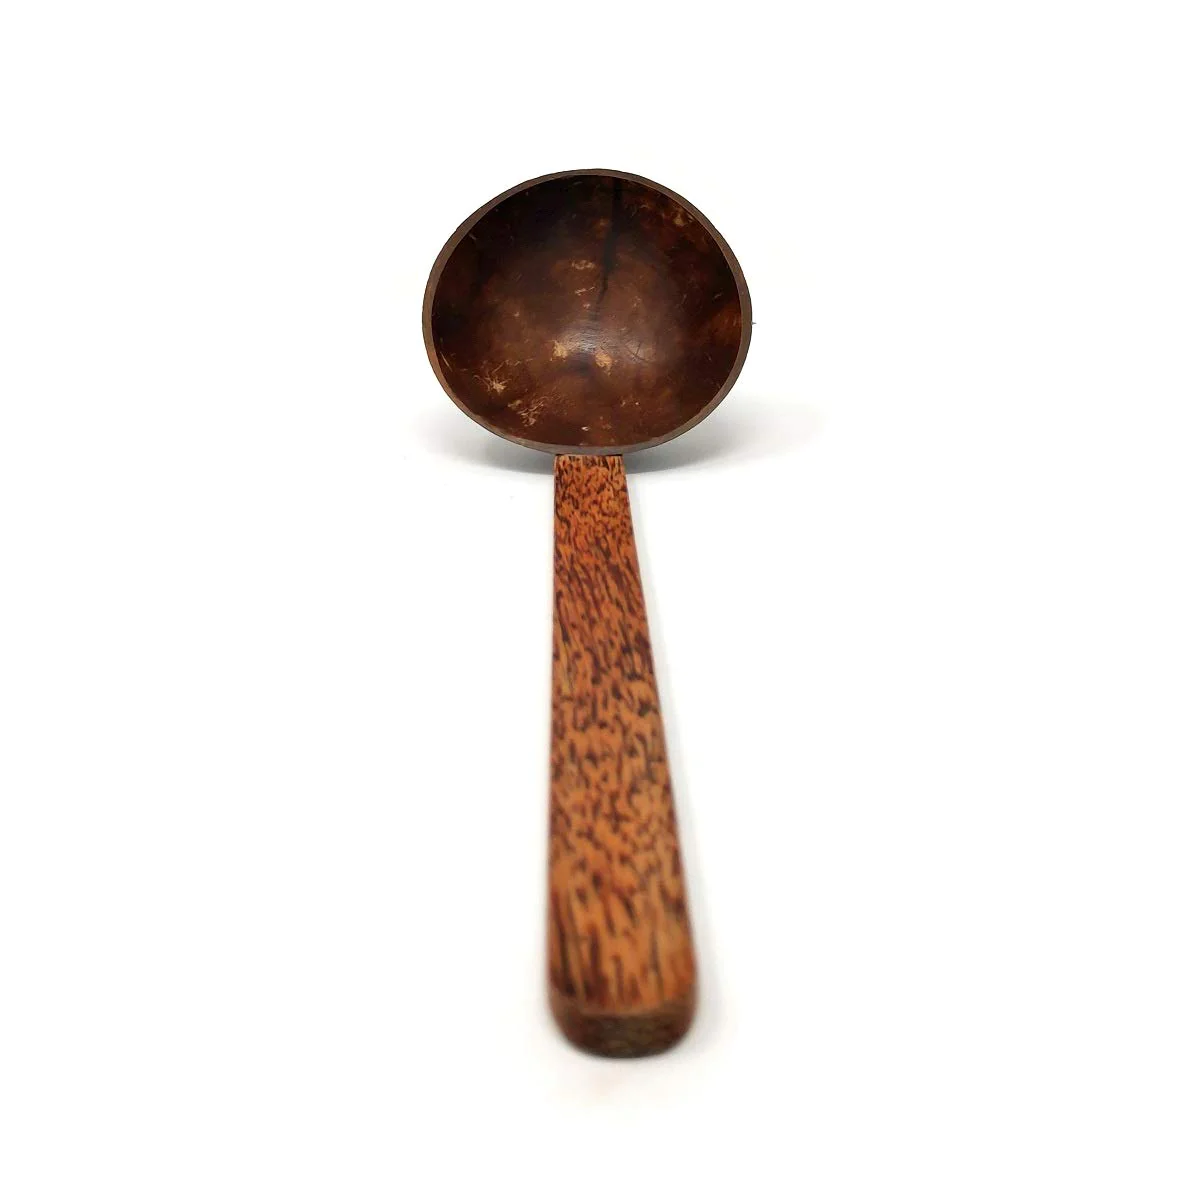 Ecocraft India Coconut Ladle Small- Natural – Organic – Hand Made